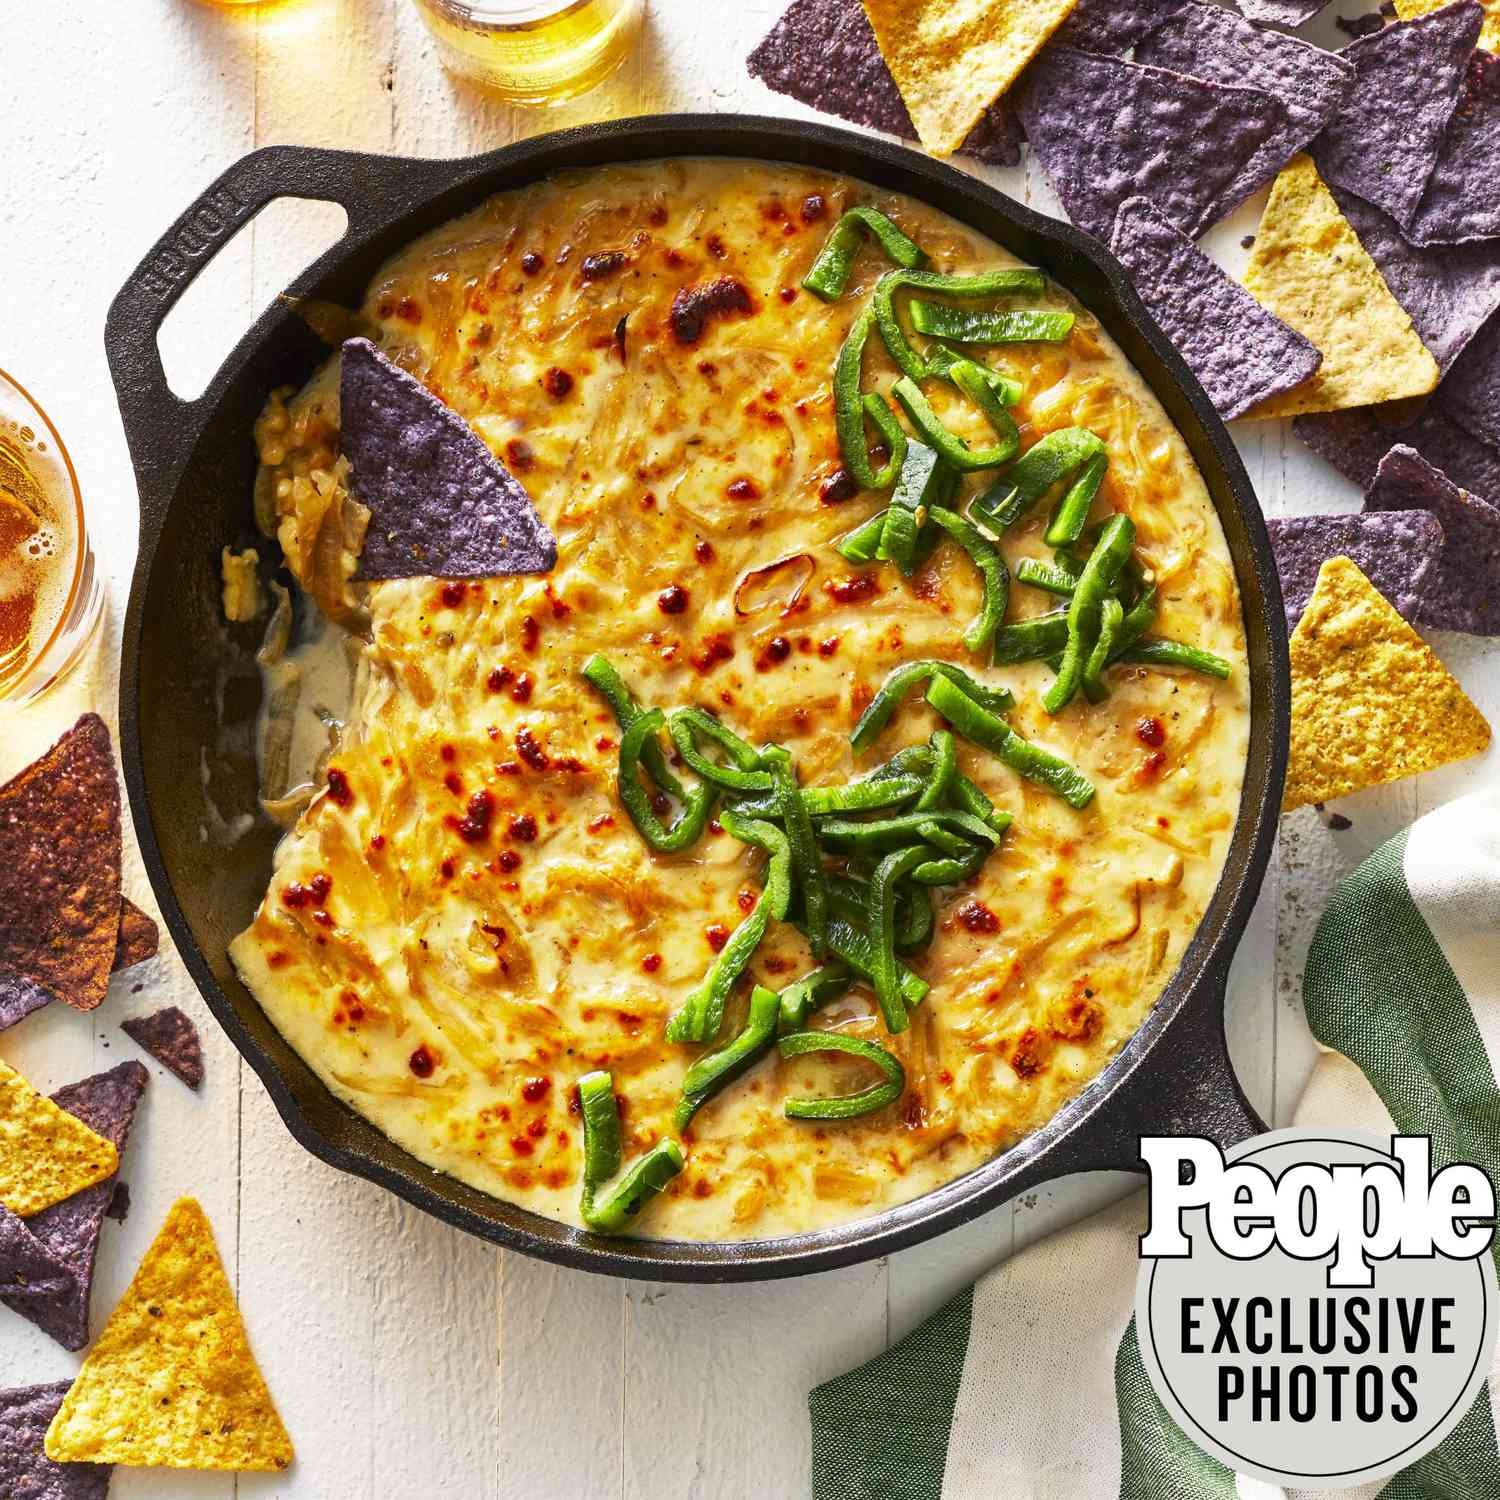 Claudette Zepeda's Warm French Onion & Queso Fundido Dip